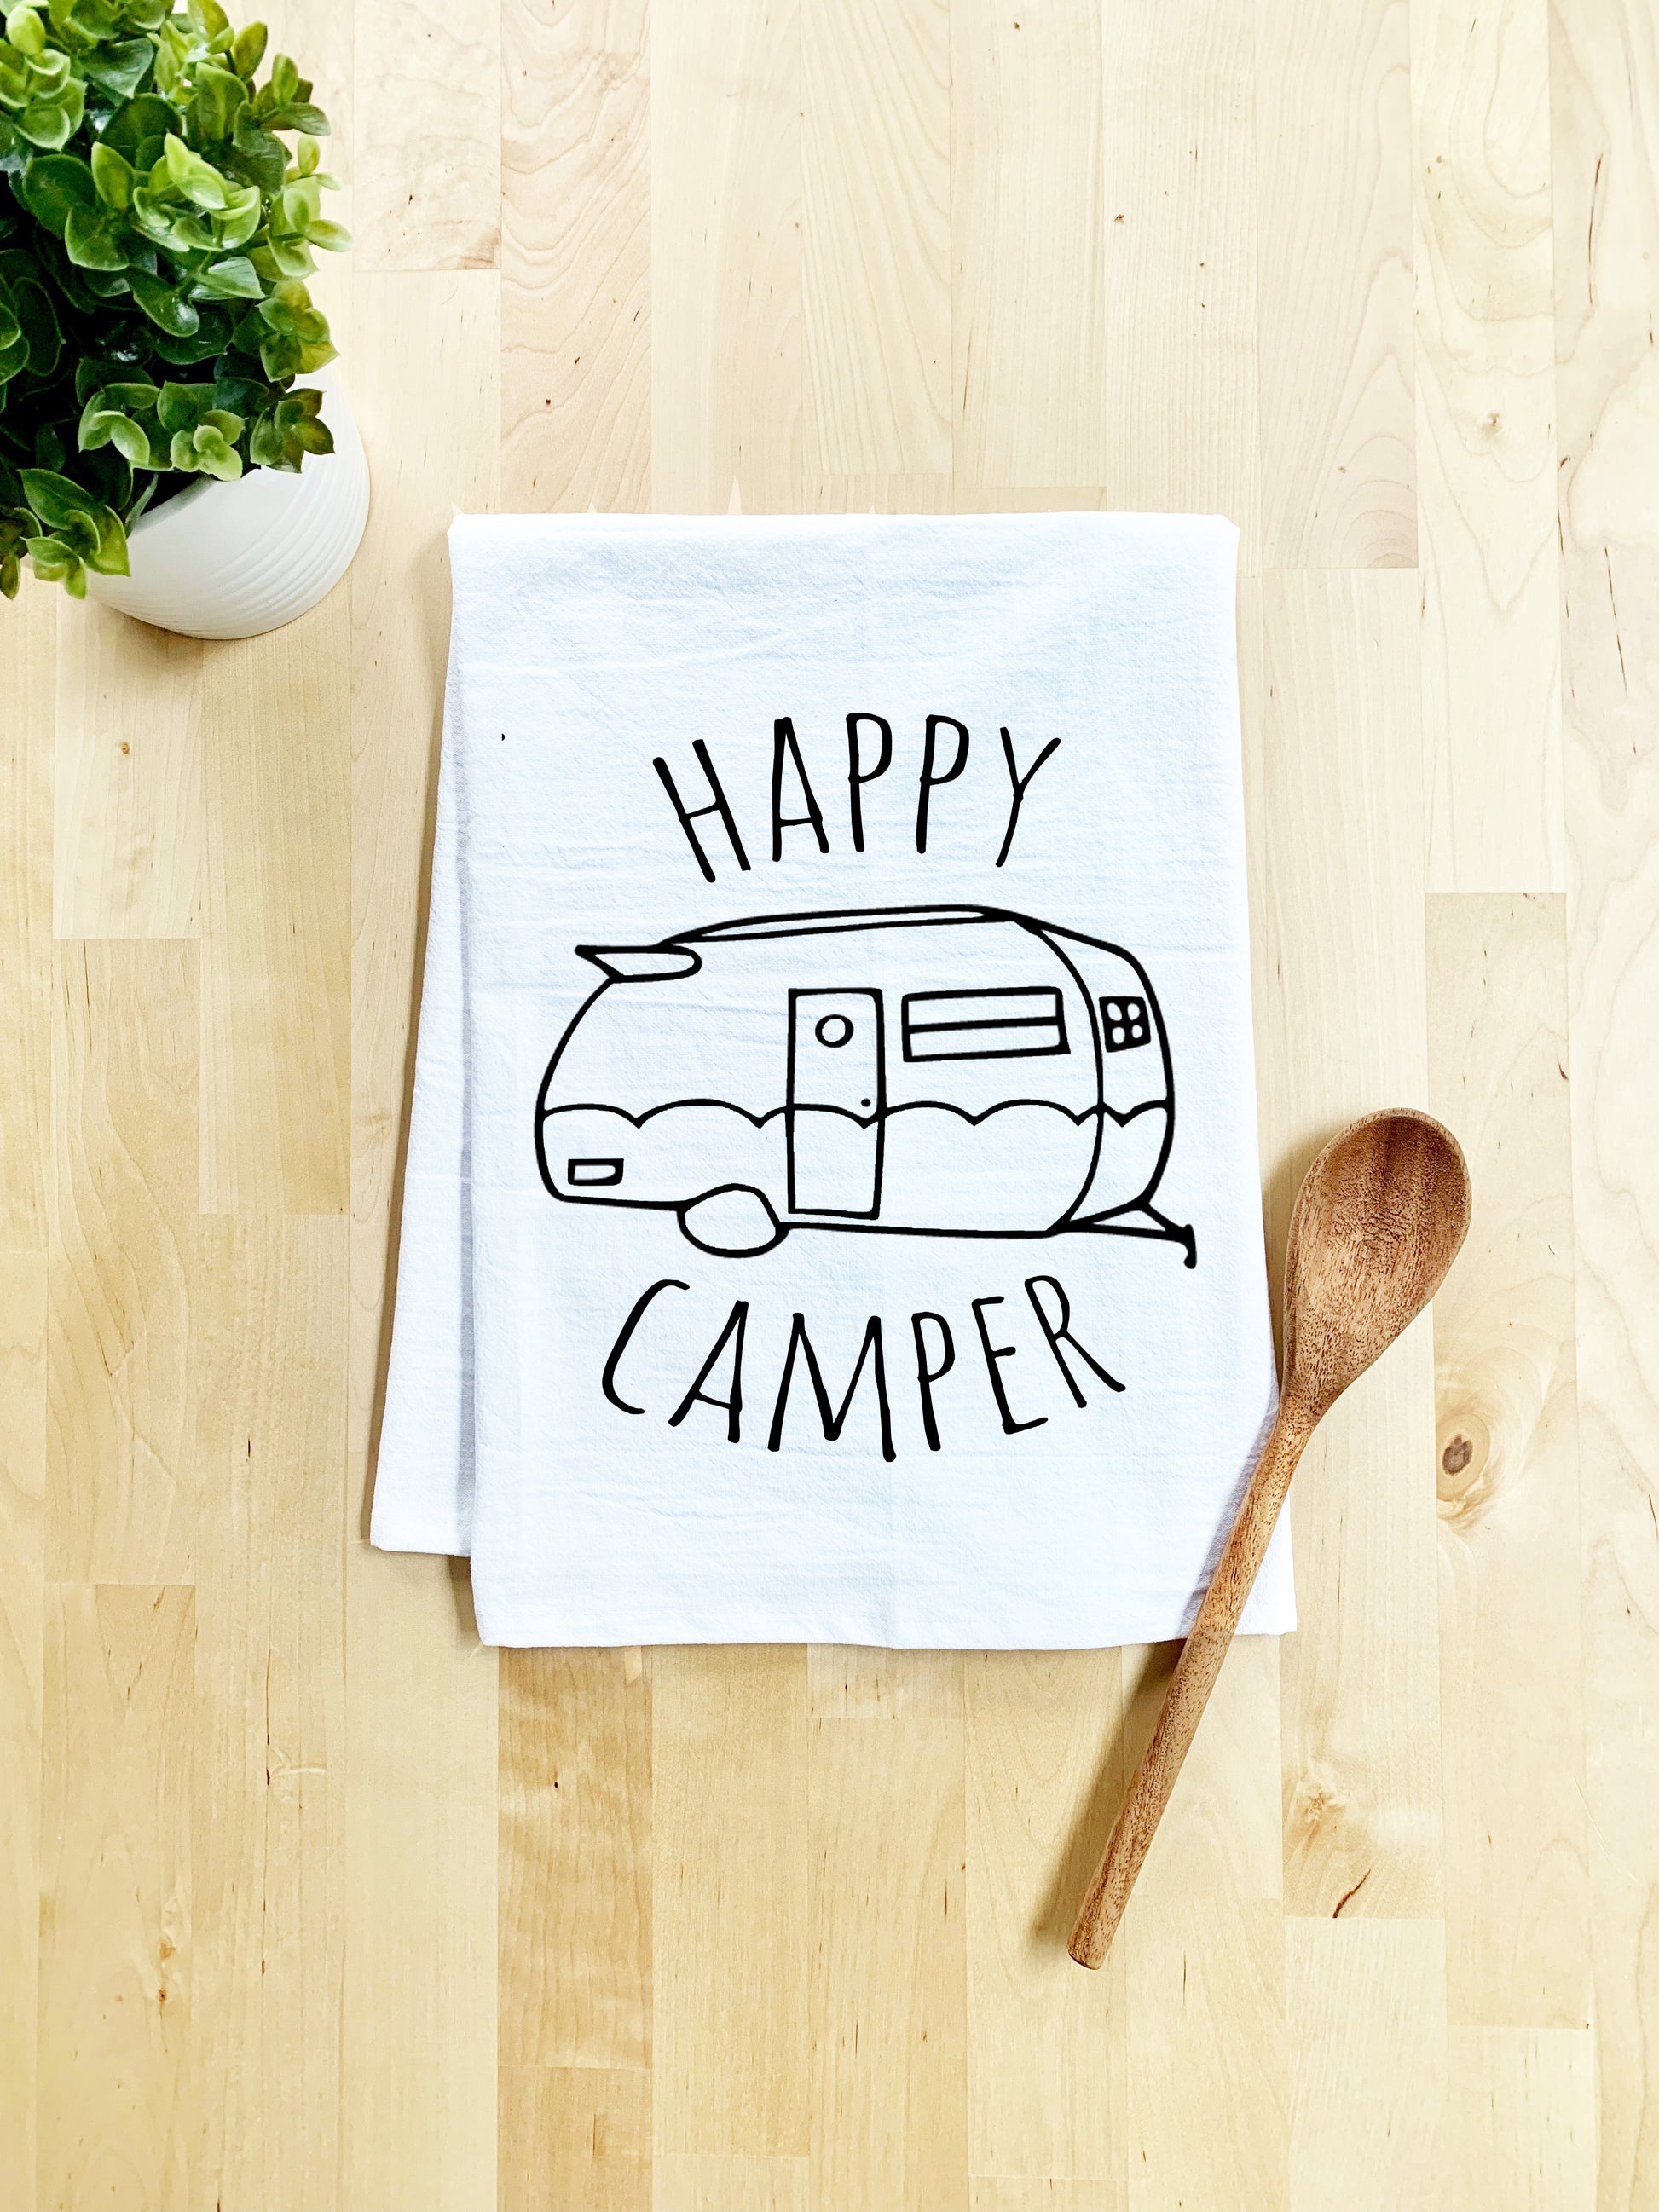 Live Love Glamp - Camper Towels and Banner Cream Panel